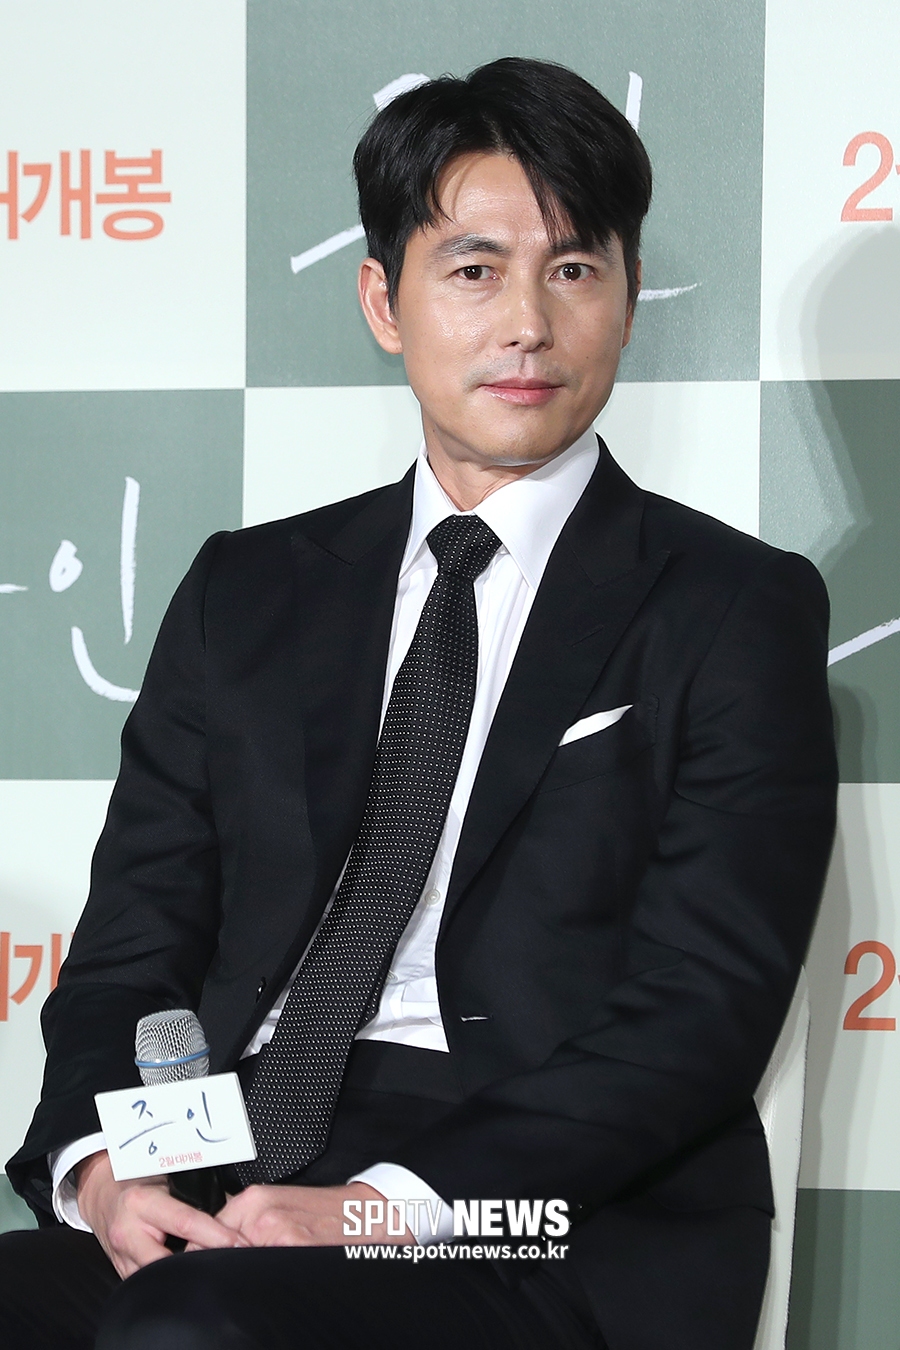 Jung Woo-sung of the movie Innocent Witness confessed that he decided to appear in a scenario that seemed to be healed.Jung Woo-sung made the announcement at the press distribution premiere of the movie Innocent Witness (director Lee Han) at the entrance of Lotte Cinema Counter in Seoul on the afternoon of the 21st.The film Innocent Witness is a drama about what happens when a lawyer Sun-ho (Jung Woo-sung), who decided to break down his beliefs for a while and become a snob for reality, meets Ji-woo (Kim Hyang-gi), the only witness in a lifetime trial.Jung Woo-sung commented on this work, I did not need any special resolutions. When I read the scenario, the feelings of Ji-woo and Sunho were so warm, and the feelings with my father were so warm.When I felt the warmth and read the scenario, I felt like I was healed. Jung Woo-sung, who has been showing intense characters in Asura, The King, Inland, and Steel Rain, confessed, I felt like I was just shooting when I covered the scenario, I felt like I was able to take care of myself in the inside of the human being, ...Jung Woo-sung added, I had a desire to meet Ji-woo on the filming site and read the scenario and feel and express my feelings again.The movie Innocent Witness will be released on February 13th.